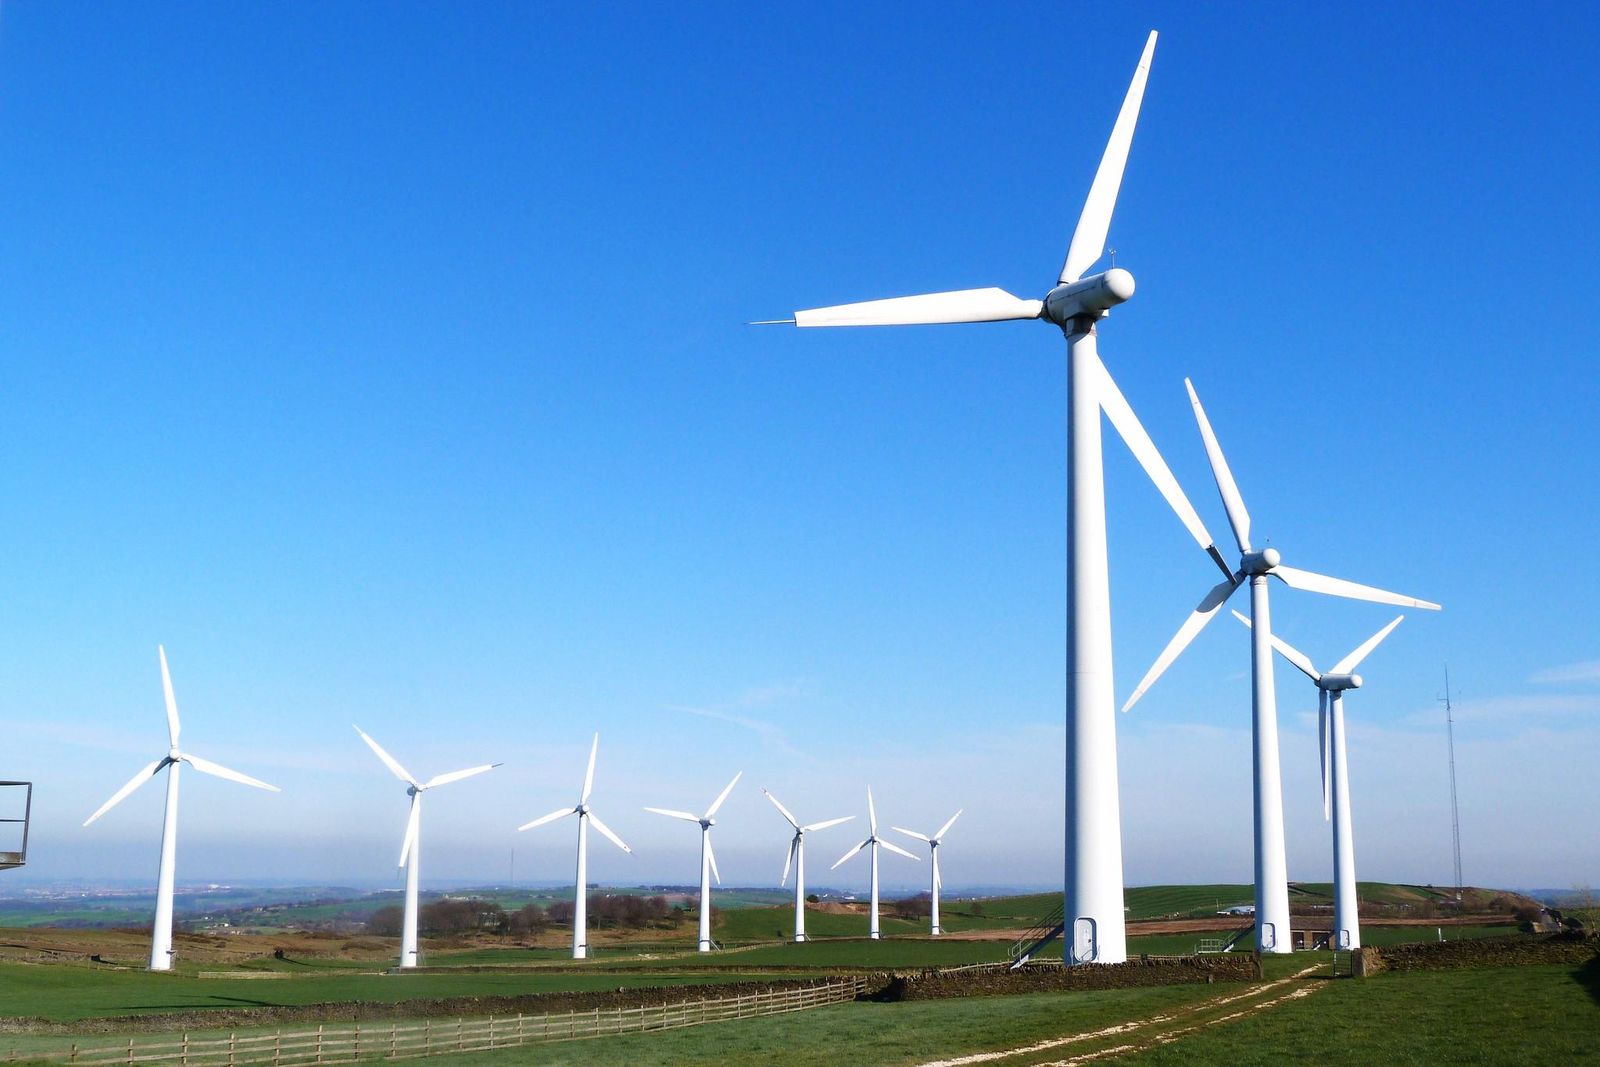 Wind turbines generate more than half of UK's electricity due to